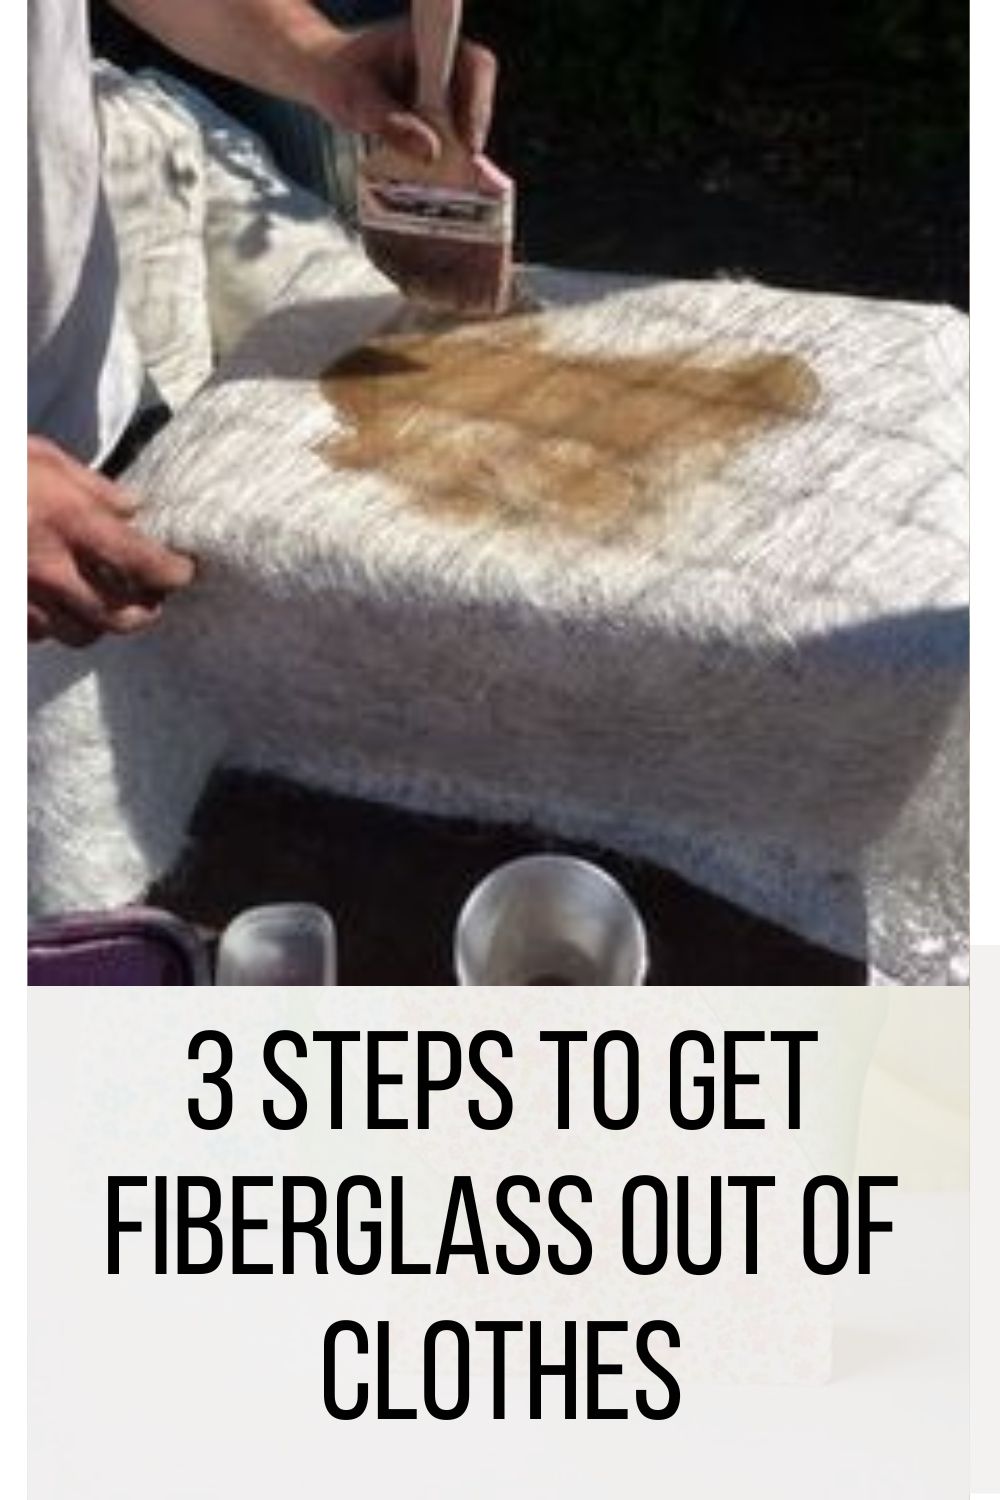 3 Steps to Get Fiberglass out of Clothes